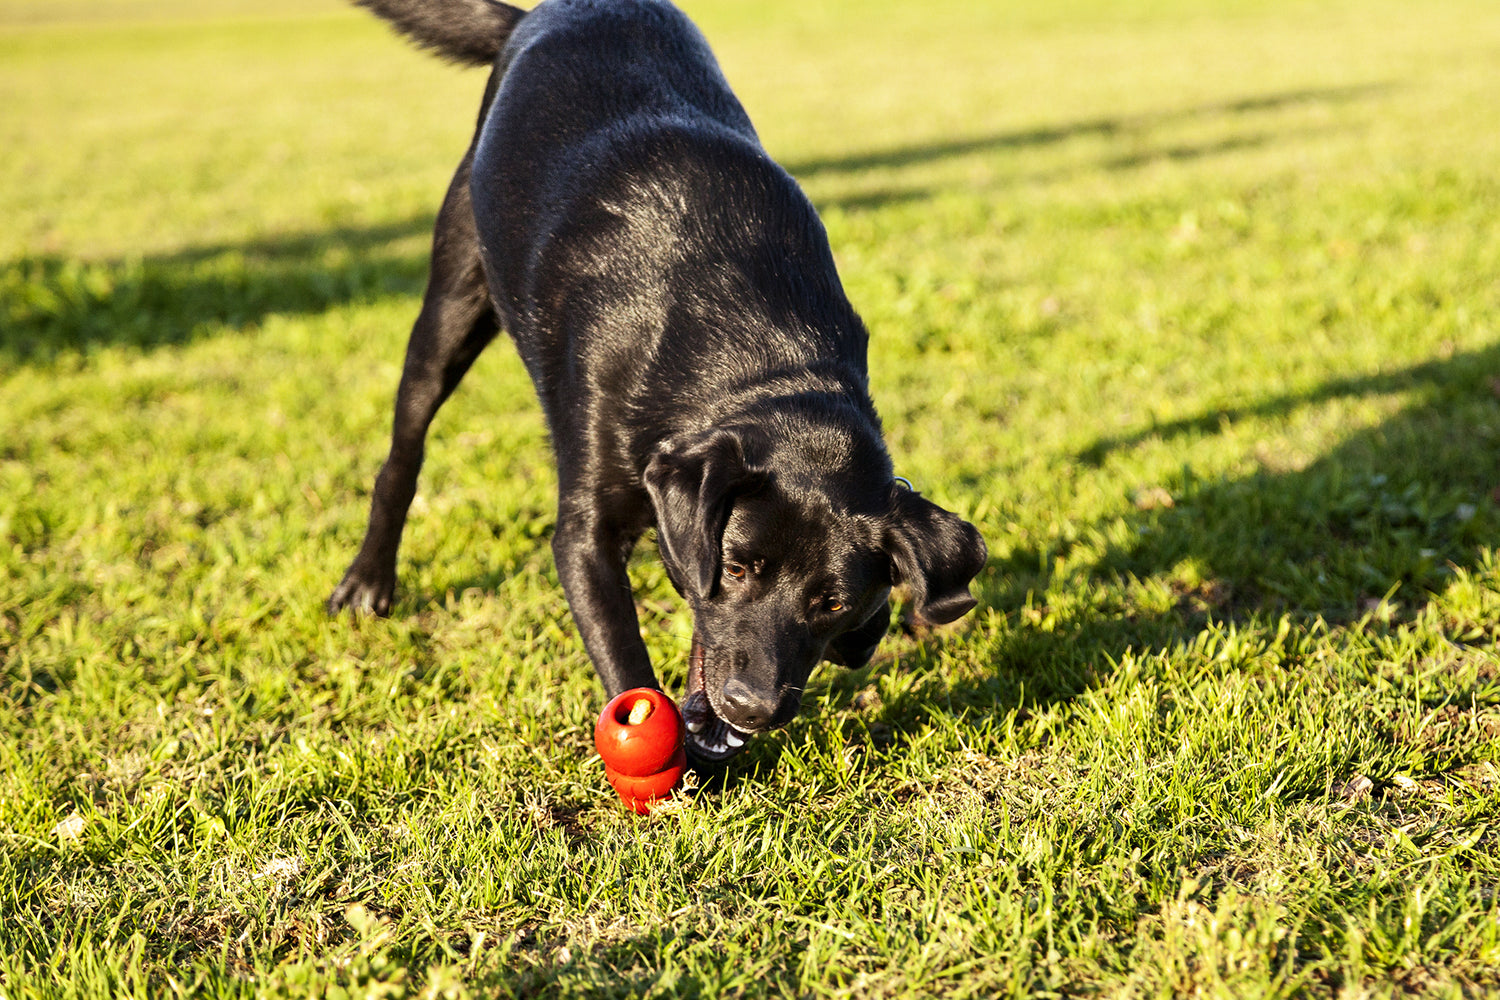 4 Nutritional Recipes for Kongs and Other Enrichment Toys